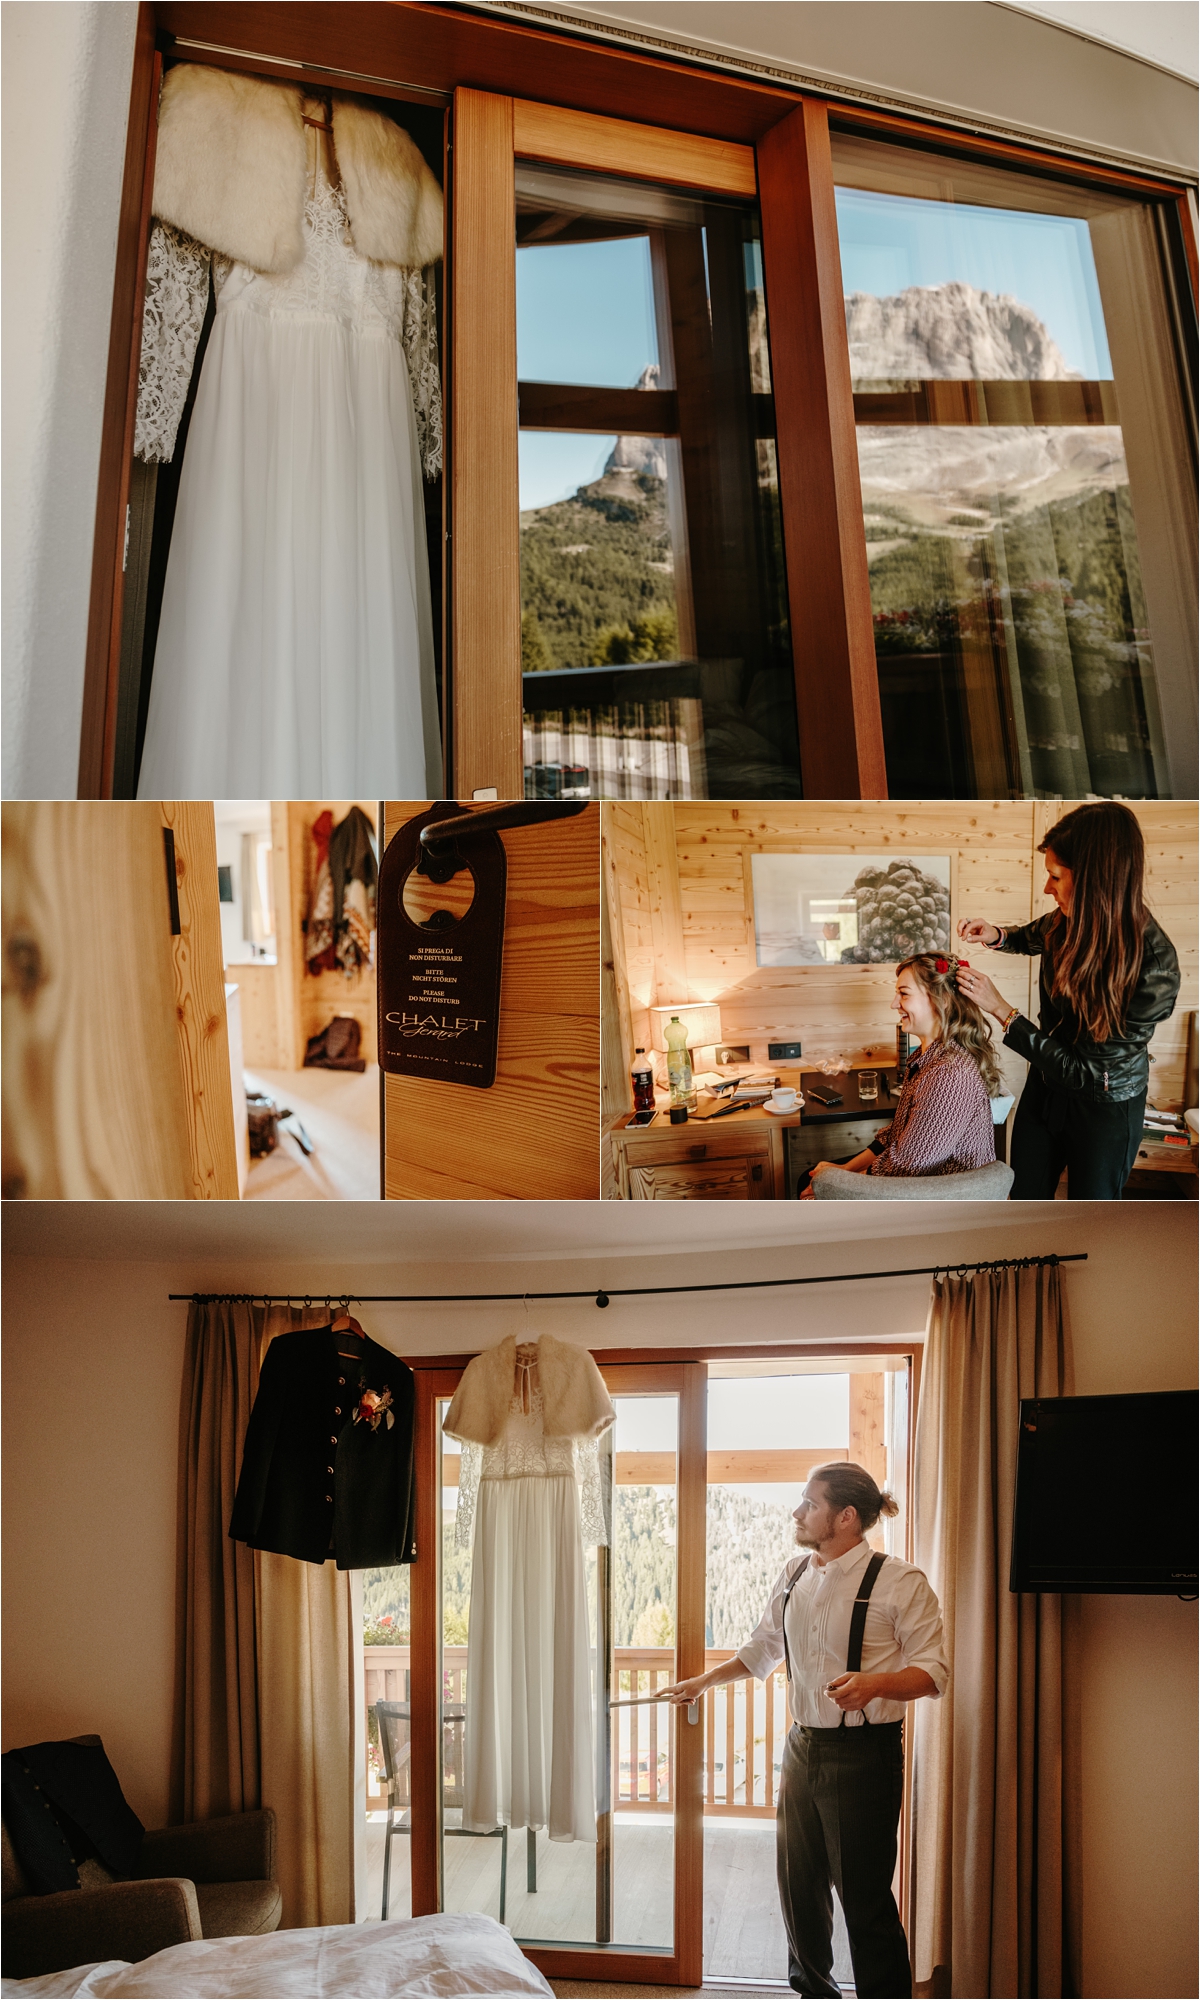 Anna & John getting ready for their elopement at Chalet Gerard in the Dolomites. Photos by Wild Connections Photography